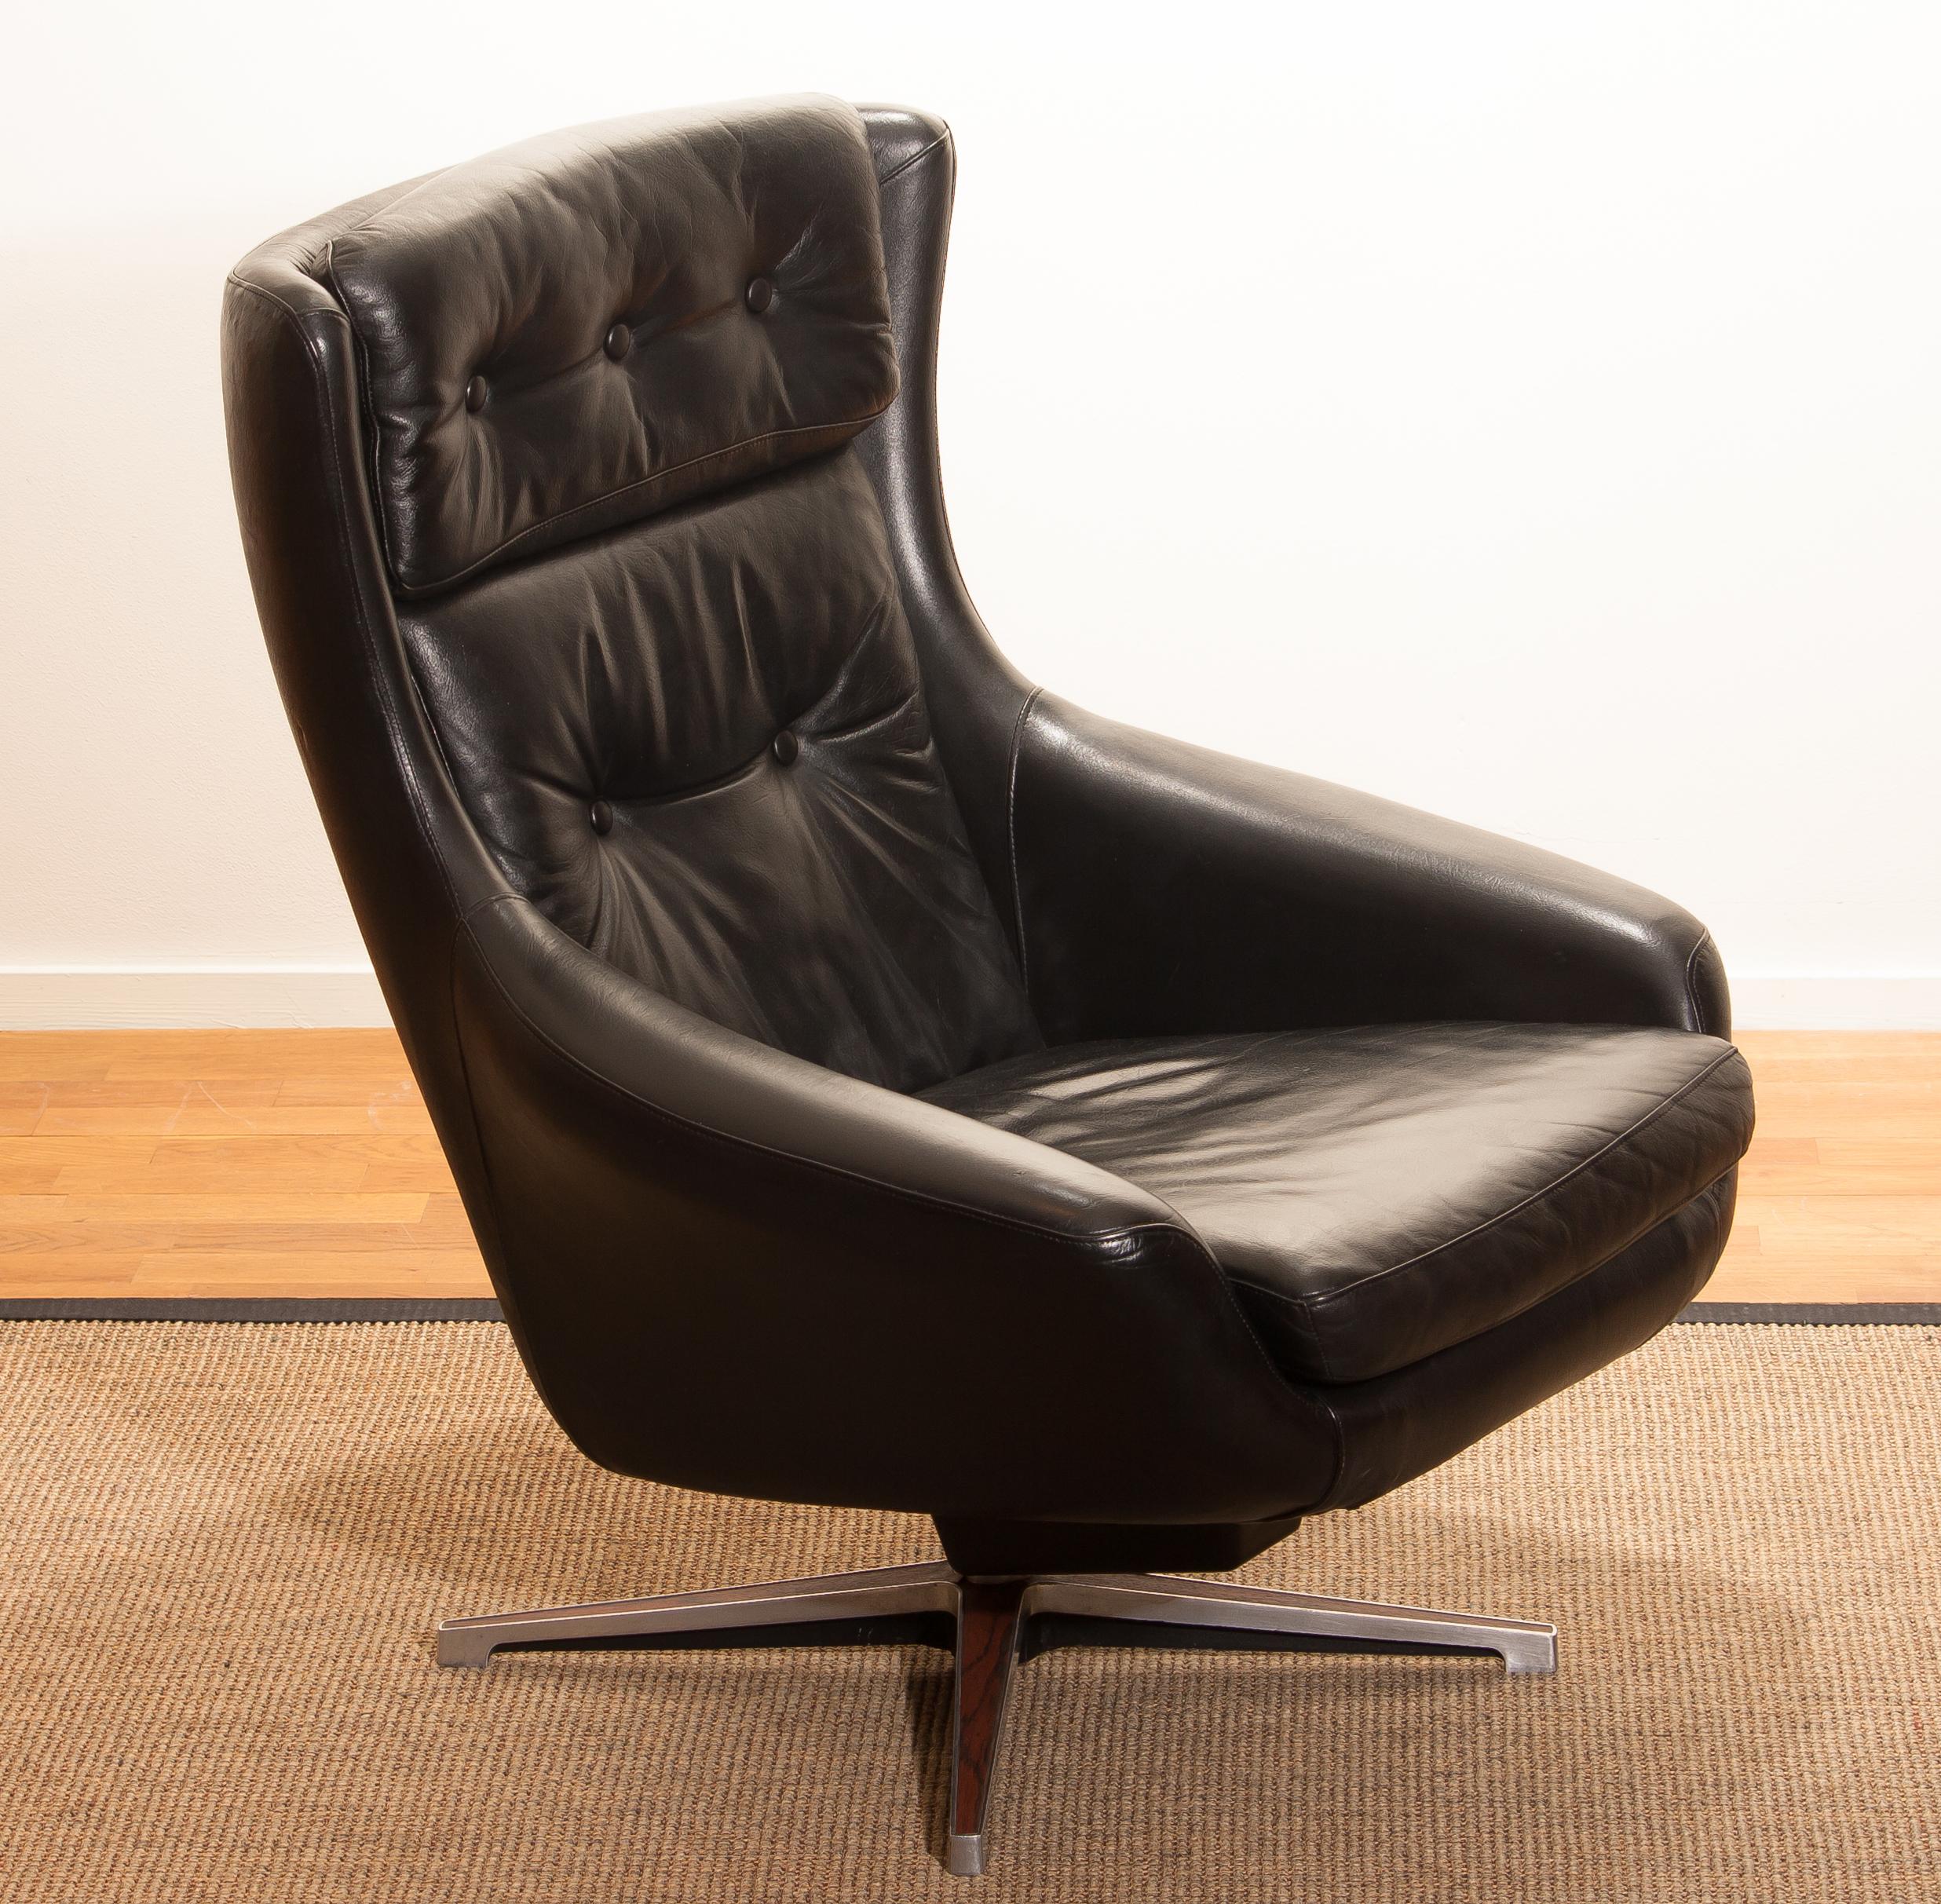 1960s, Black Leather Swivel Rocking Lounge Chair by Lennart Bender 1